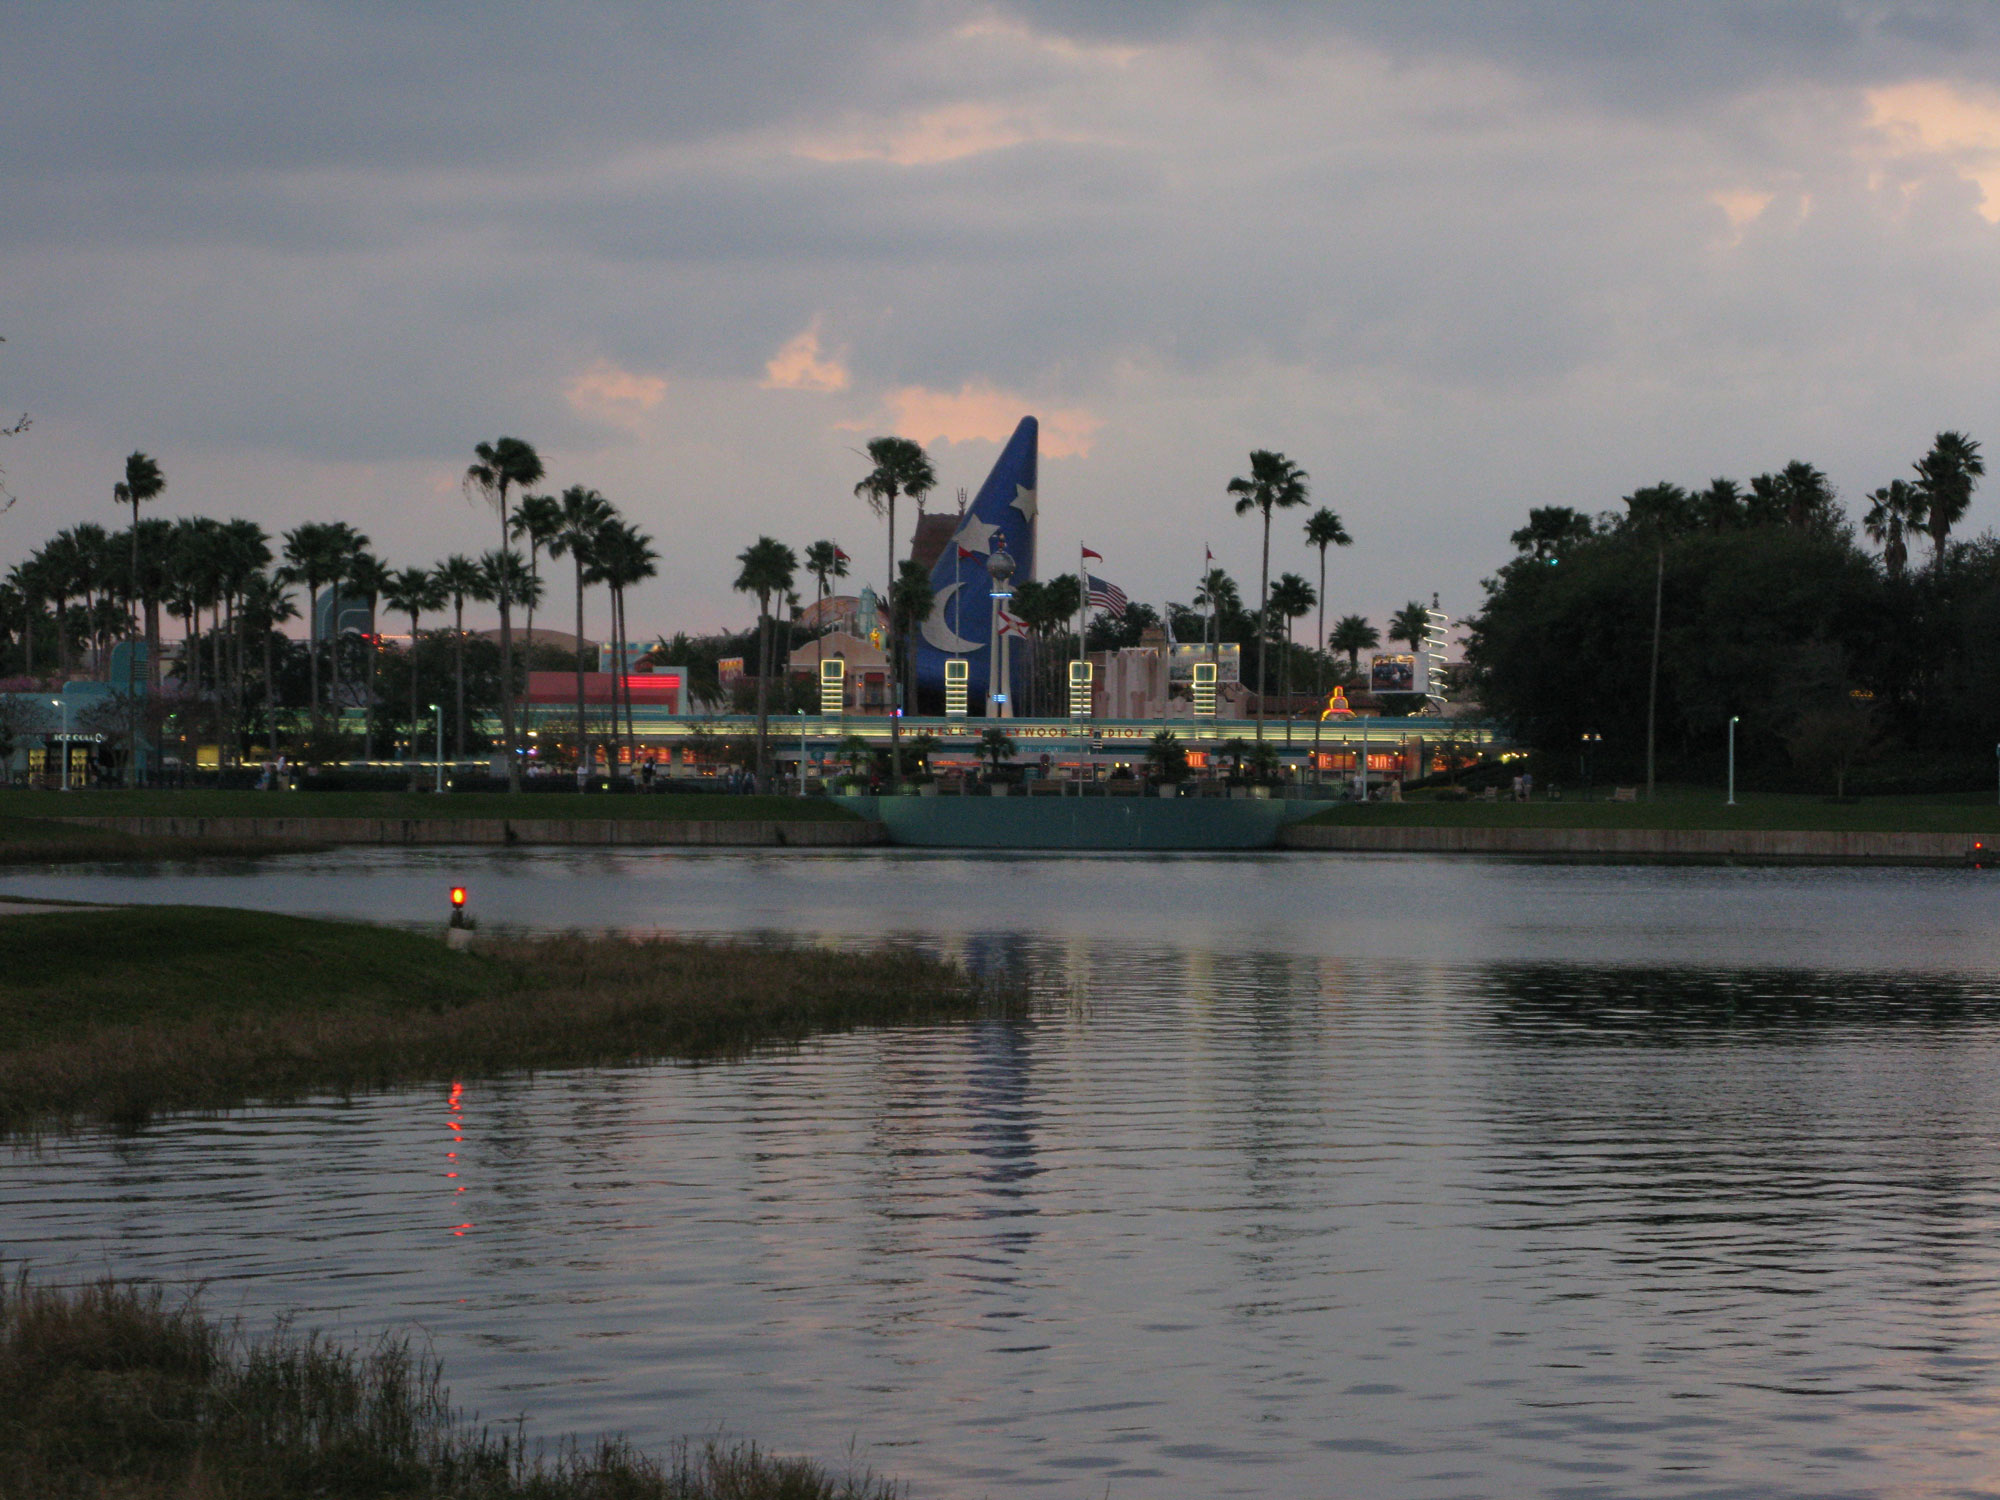 Walkway from Disney Hollywood Studios to Epcot resorts